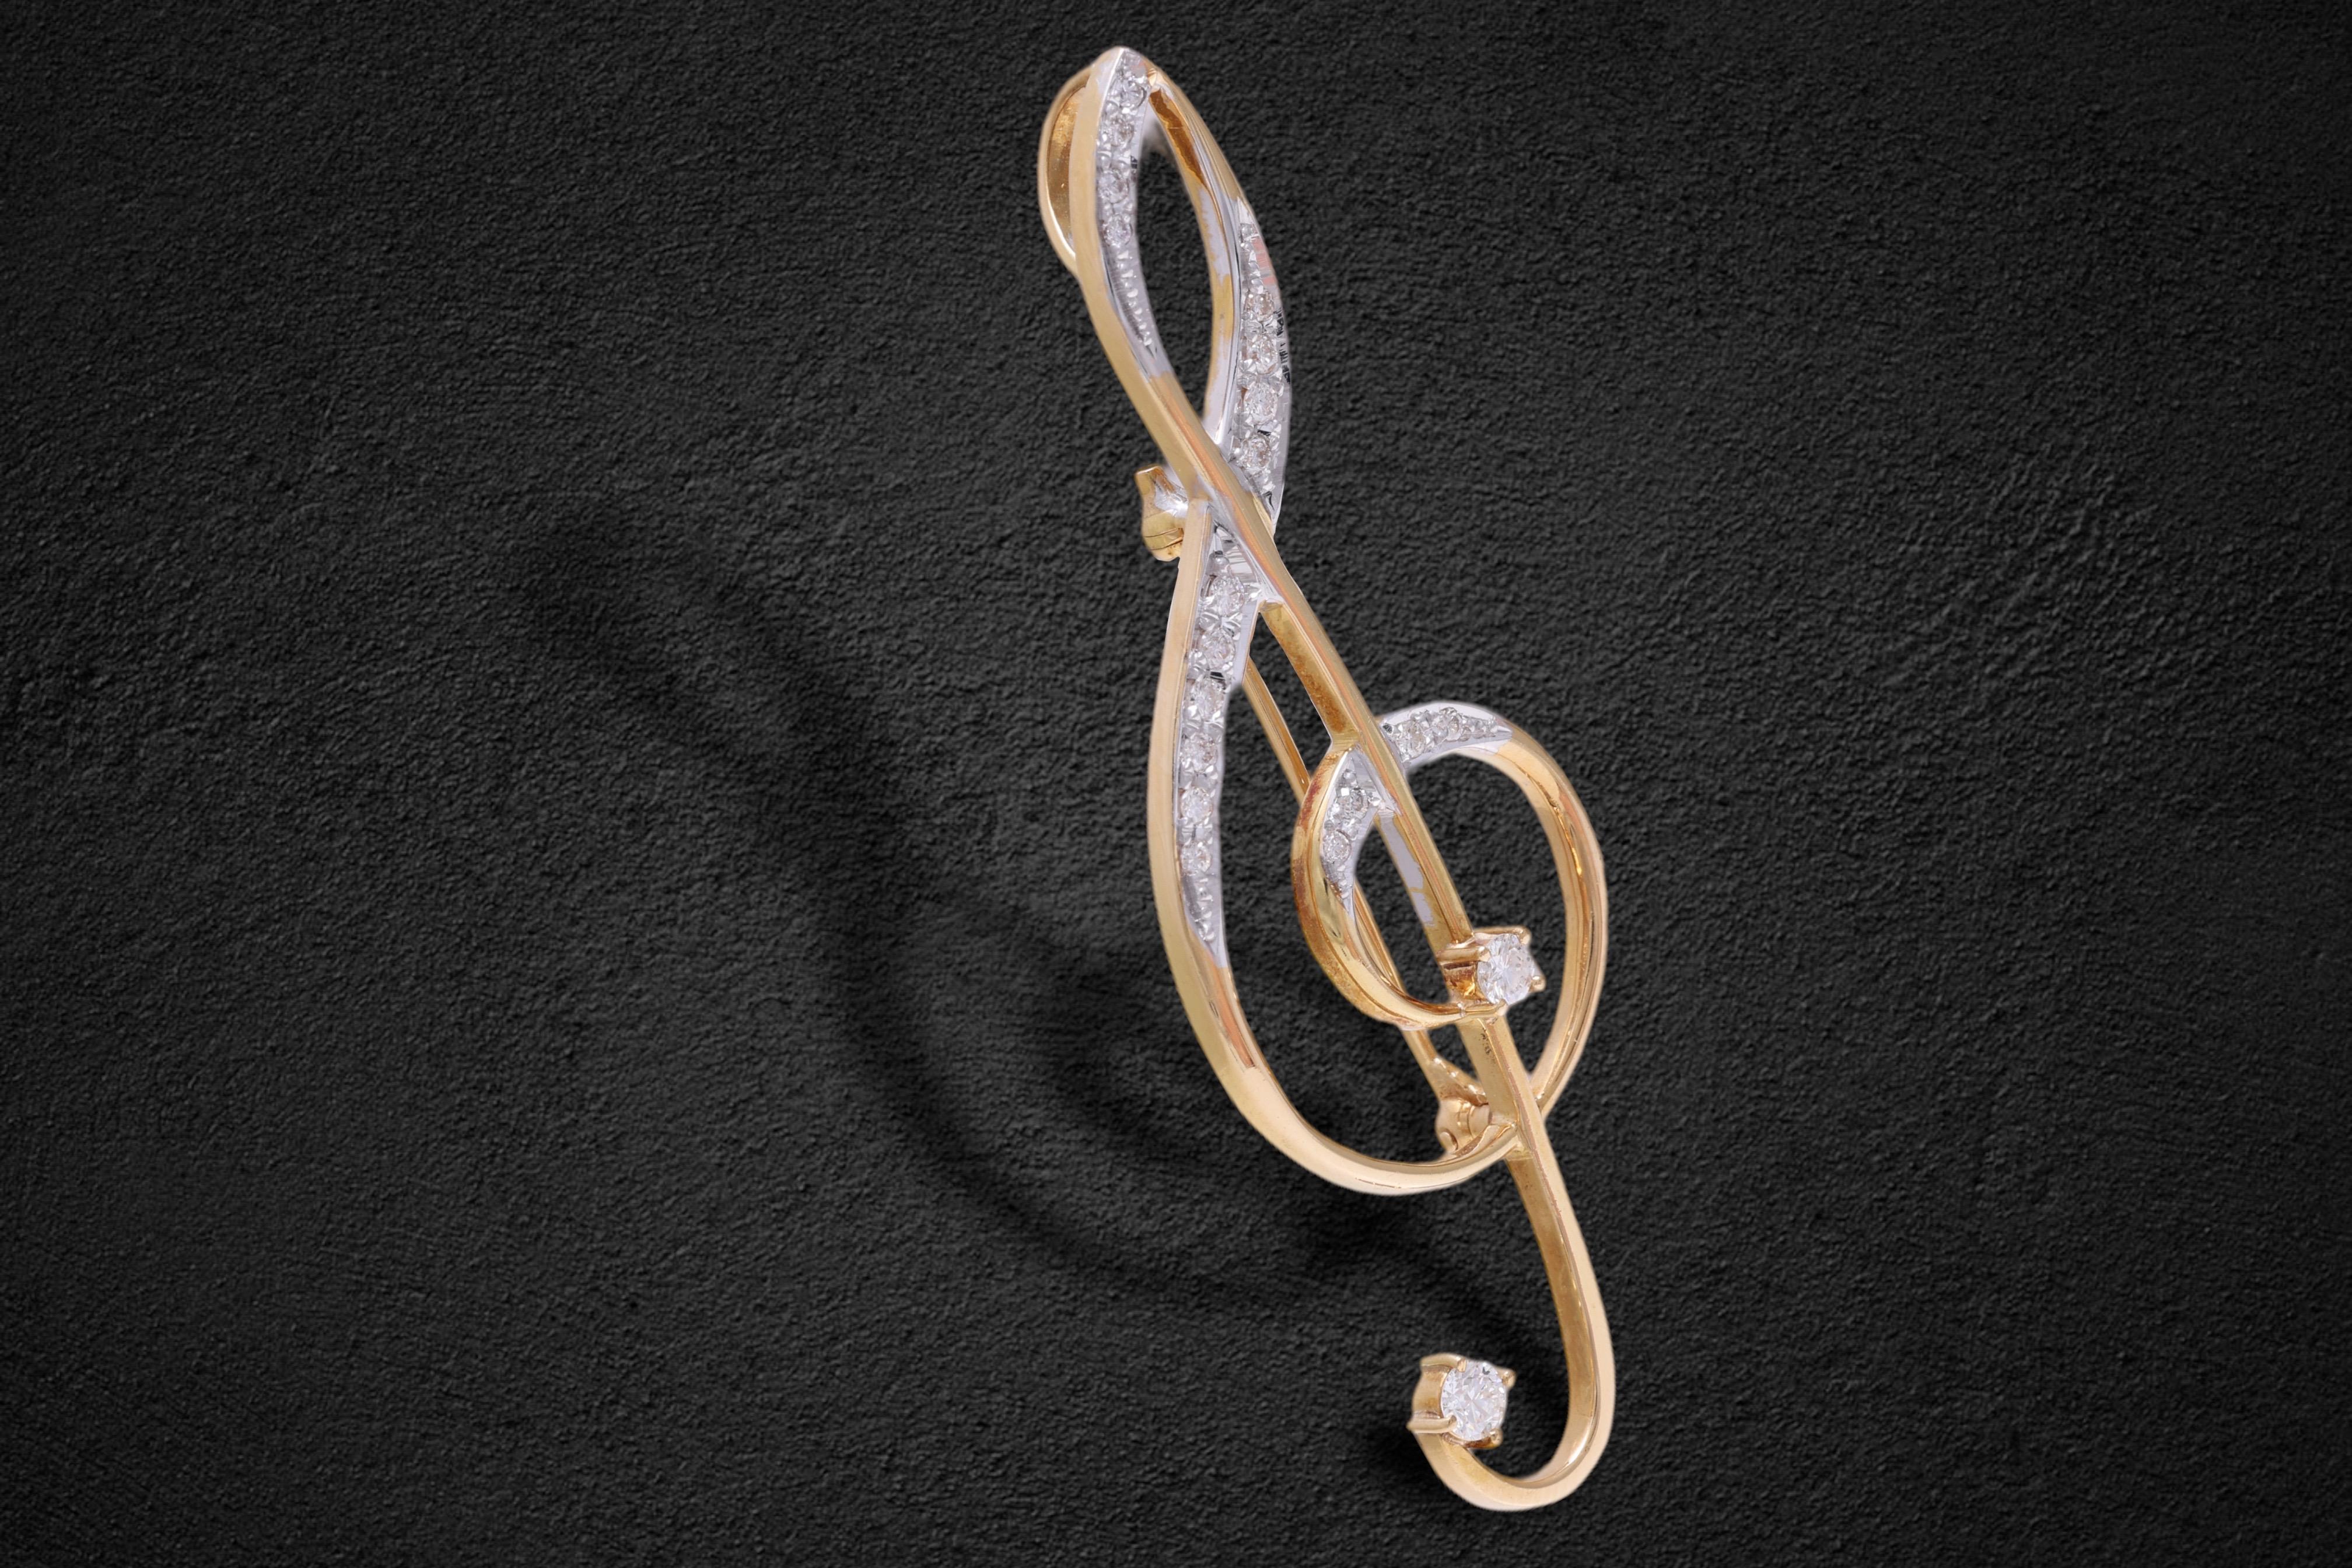 Brilliant Cut 18 kt Yellow Gold Music Note Shape Brooch / Pendent-Hanger  0.48 Ct Diamonds For Sale